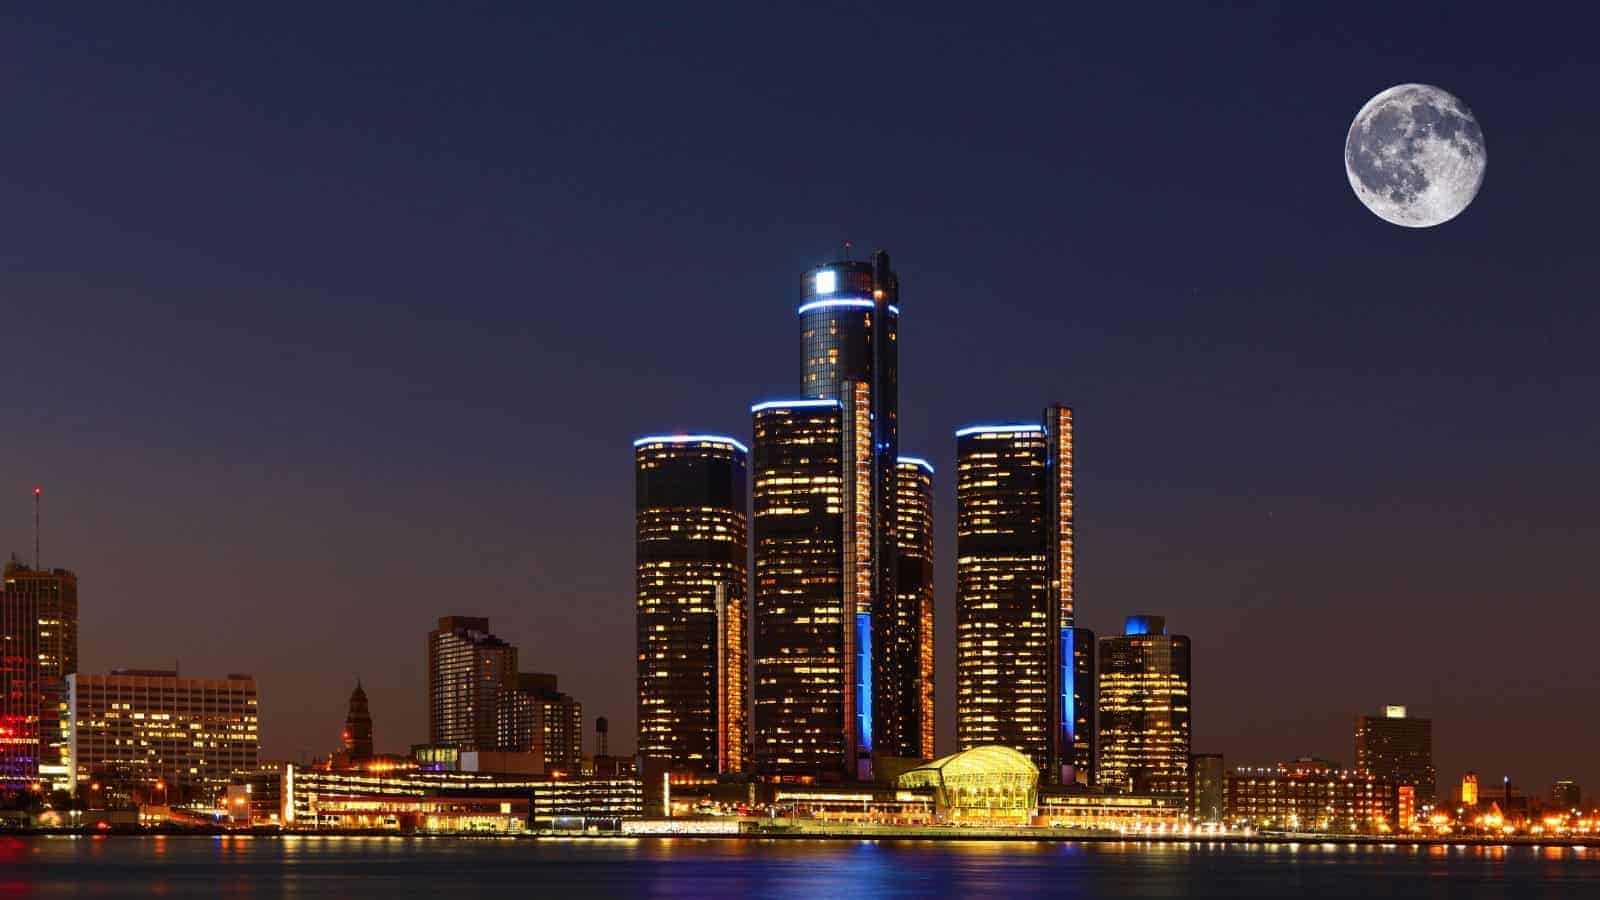 <p>Detroit is often considered one of the worst US cities to live in, and it’s not one you’ll want to visit, either. It has high rates of both violent and property crime, as well as a declining population. Detroit has also ranked as one of the dirtiest US cities over the past few years.</p>